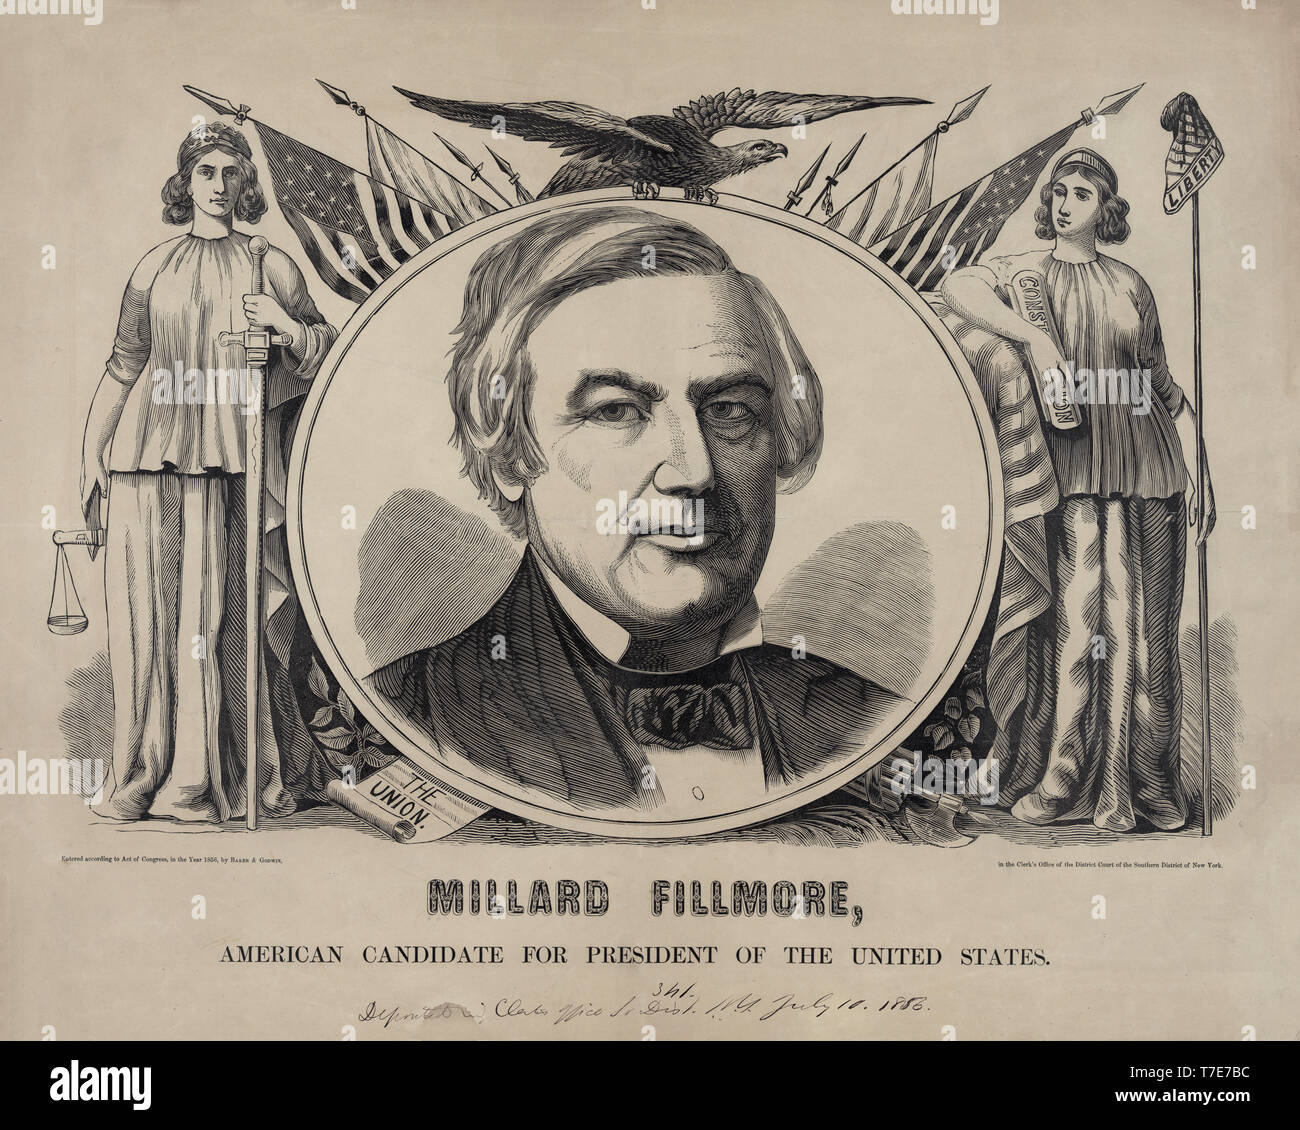 Millard Fillmore, American Candidate for the President of the United States, Campaign Banner, Published by Baker & Godwin, 1856 Stock Photo